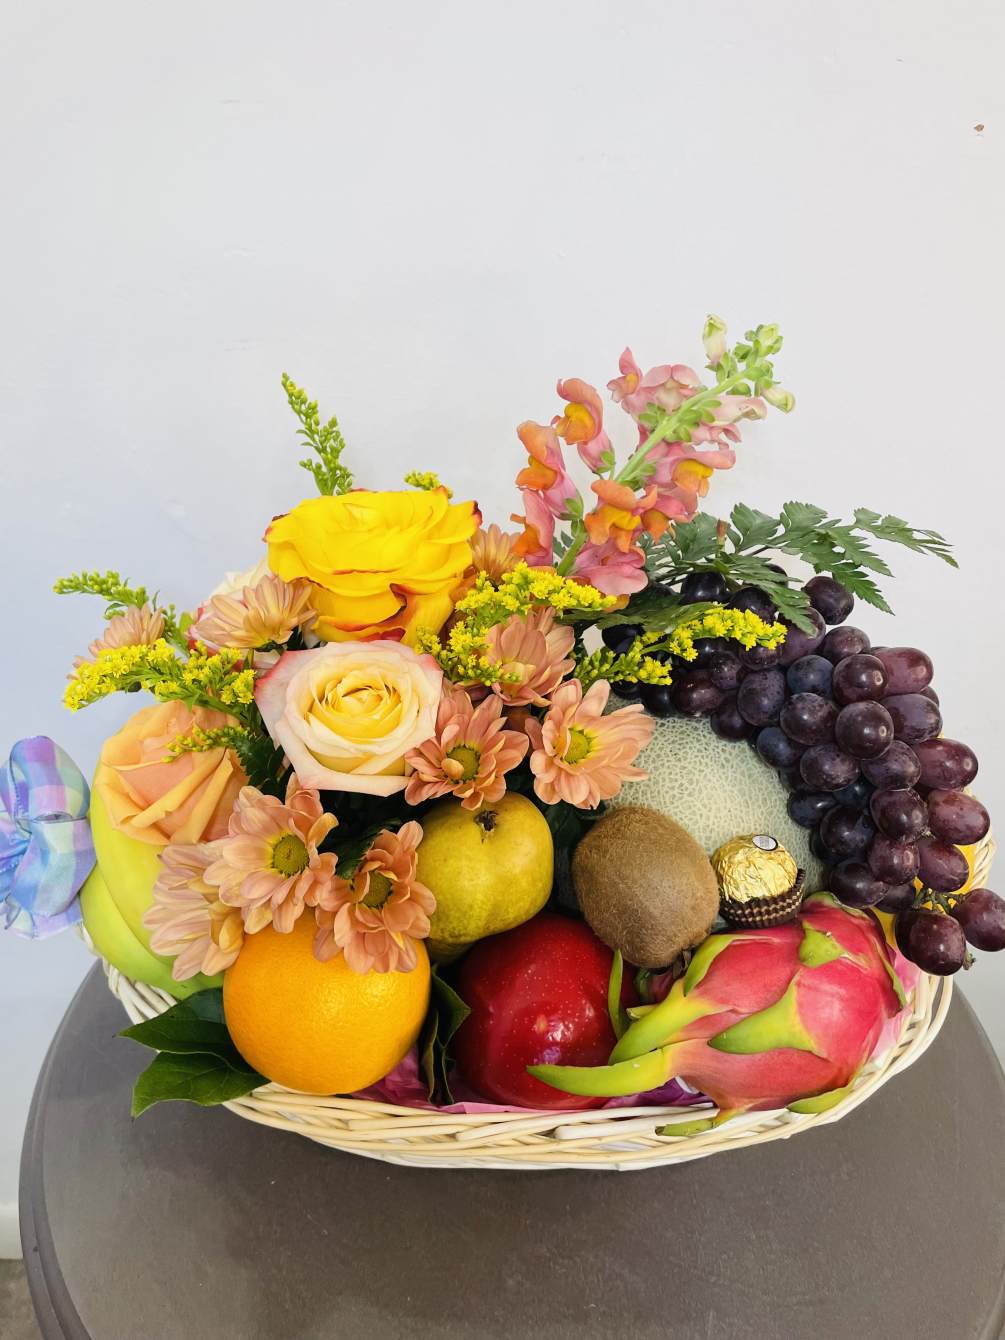 This lovely arrangement is the perfect gift to give to your loved